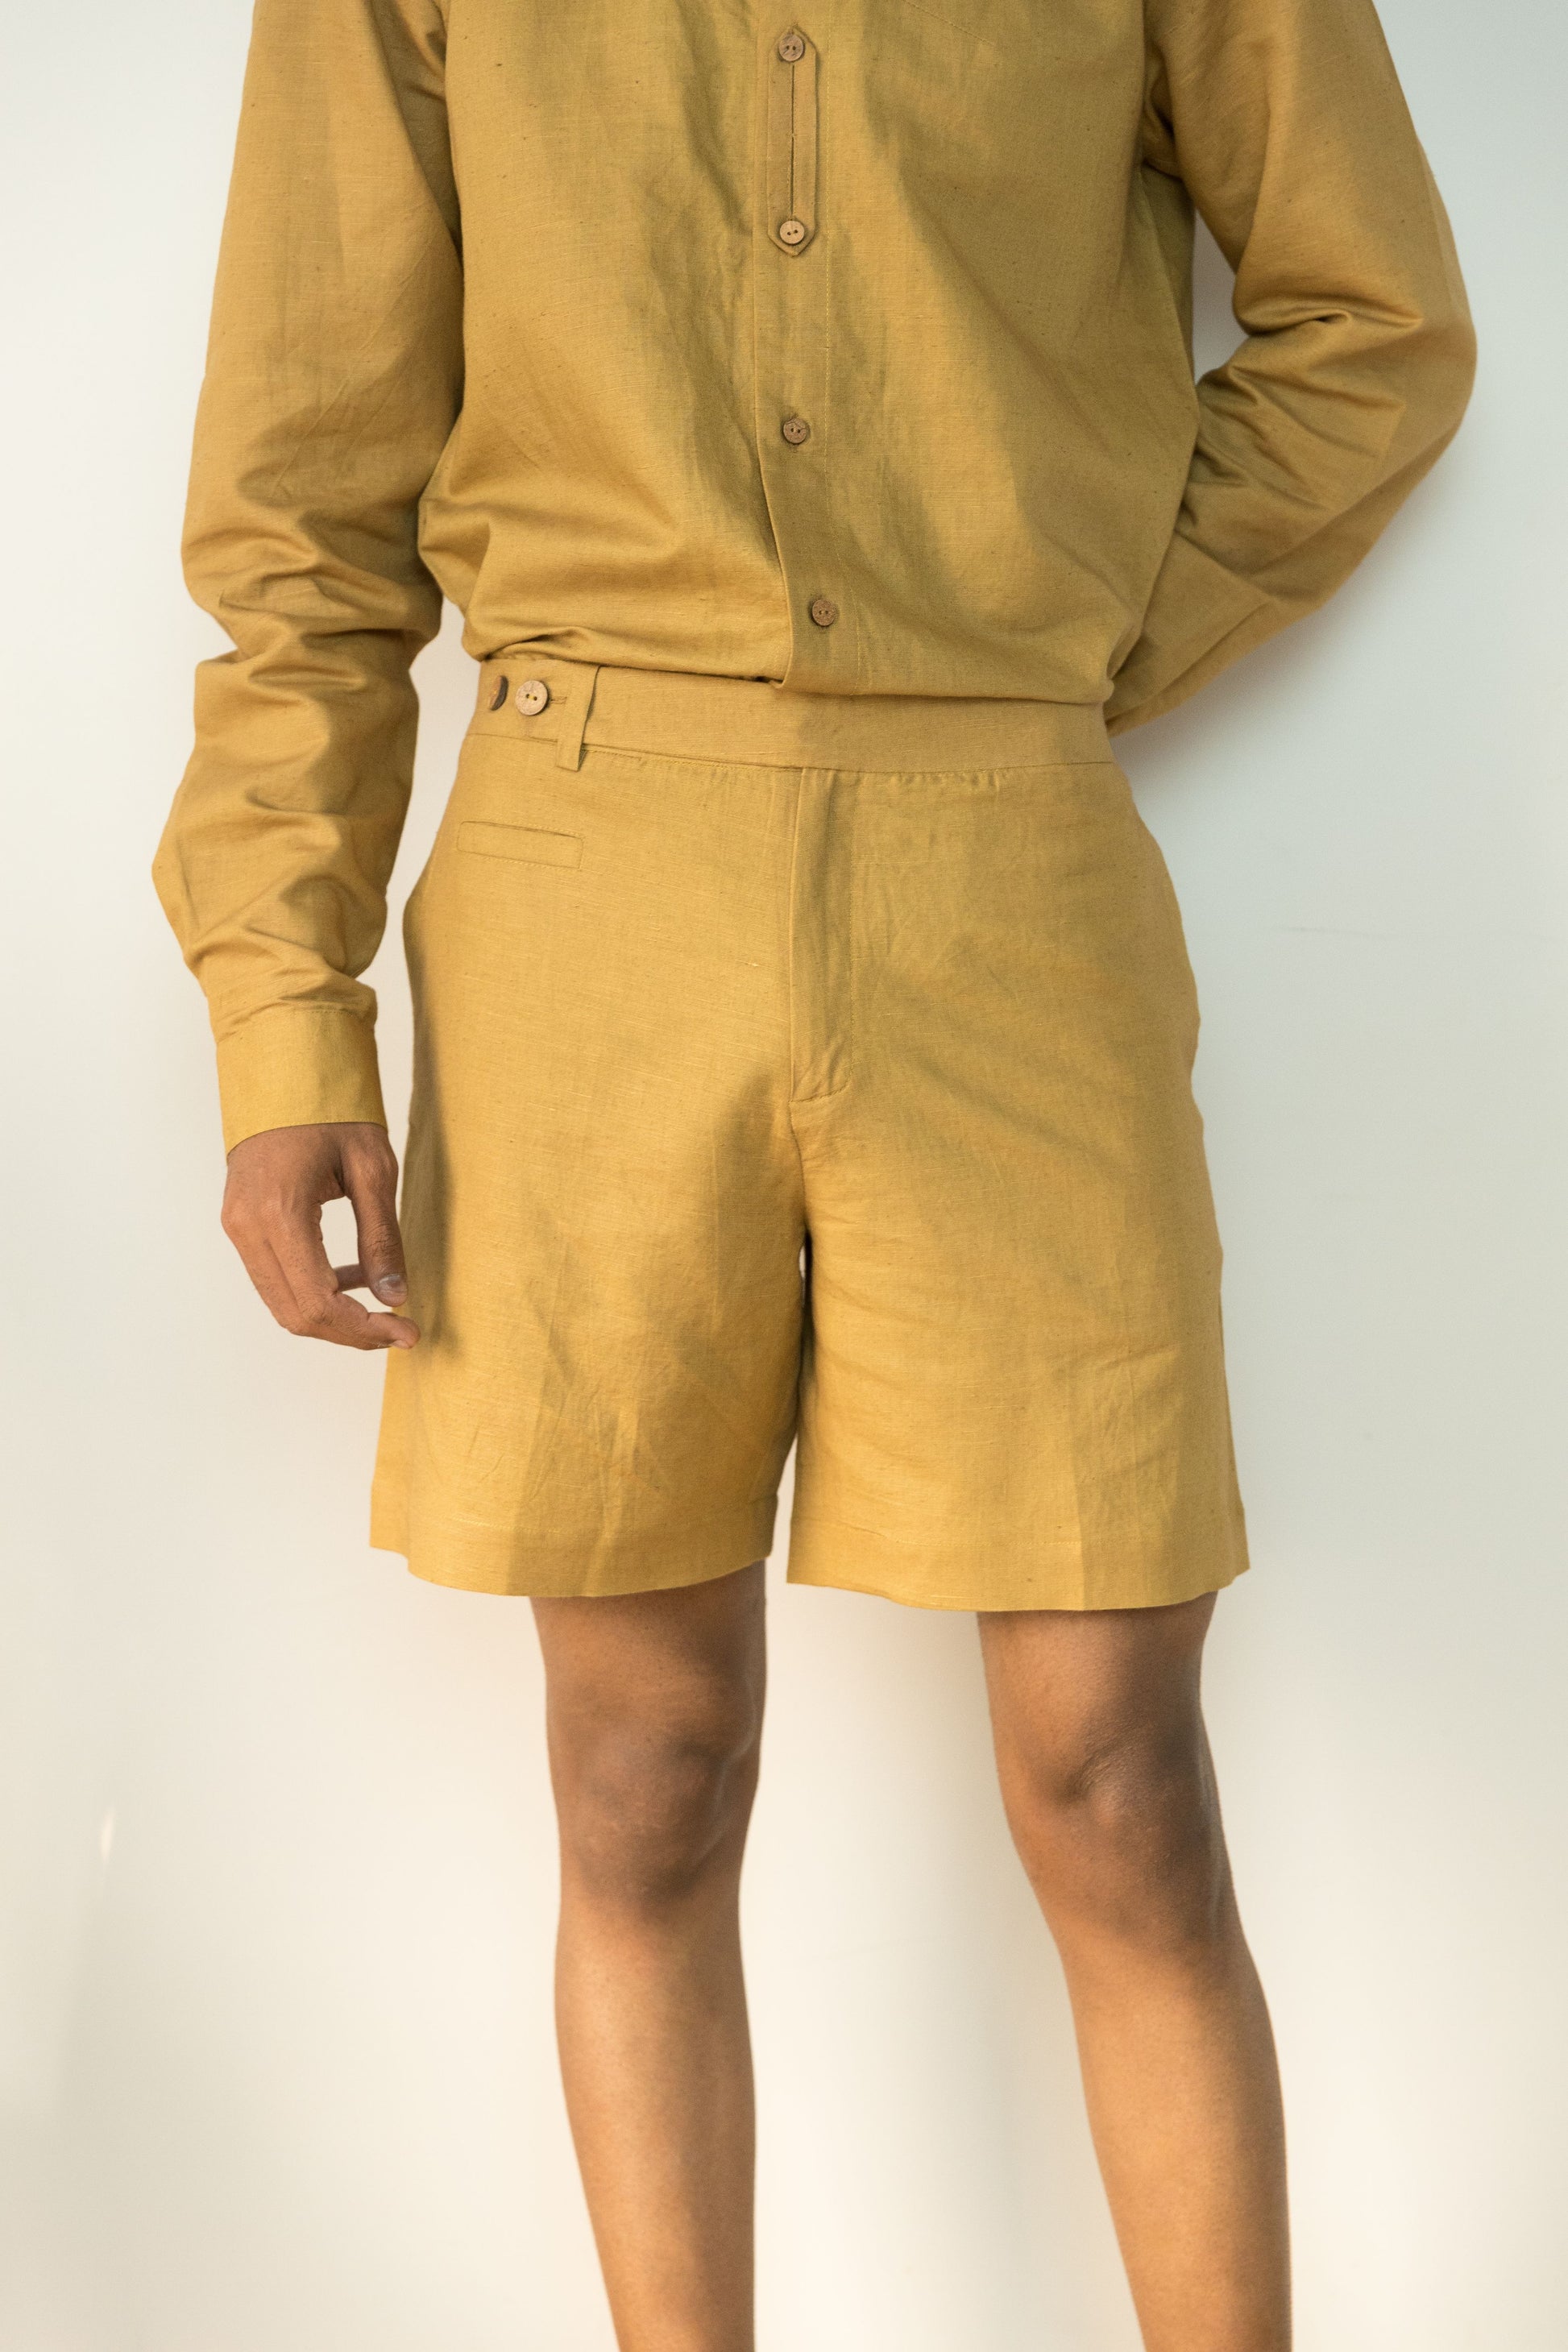 Yellow Cotton Shorts at Kamakhyaa by Anushé Pirani. This item is Casual Wear, Cotton, Cotton Hemp, For Him, For Siblings, Handwoven, Hemp, Mens Bottom, Menswear, Regular Fit, Shibumi Collection, Shorts, Solids, Yellow